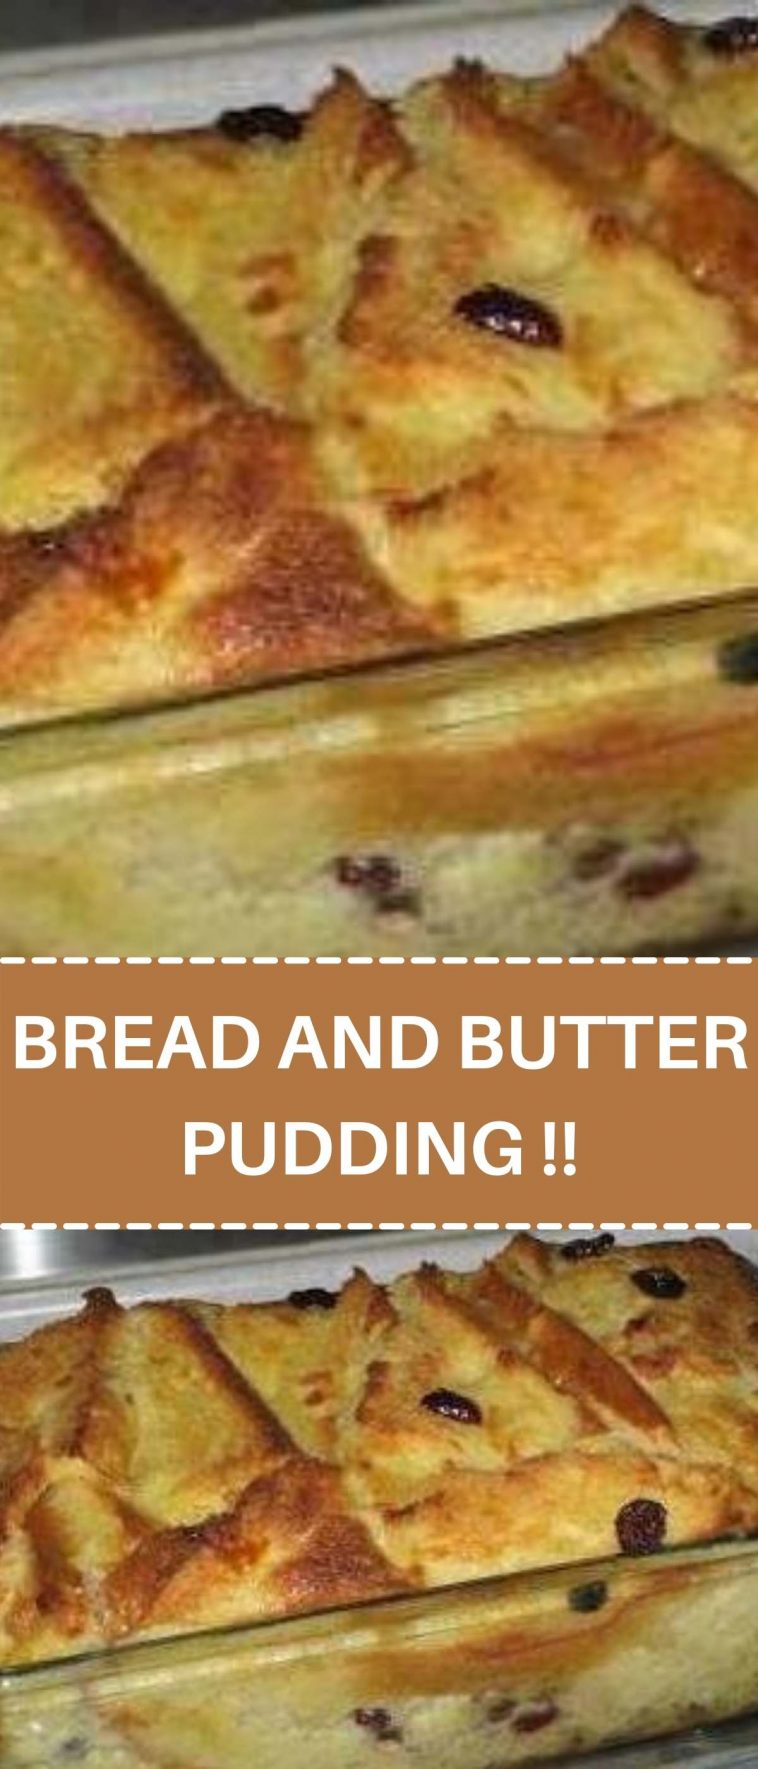 BREAD AND BUTTER PUDDING !!